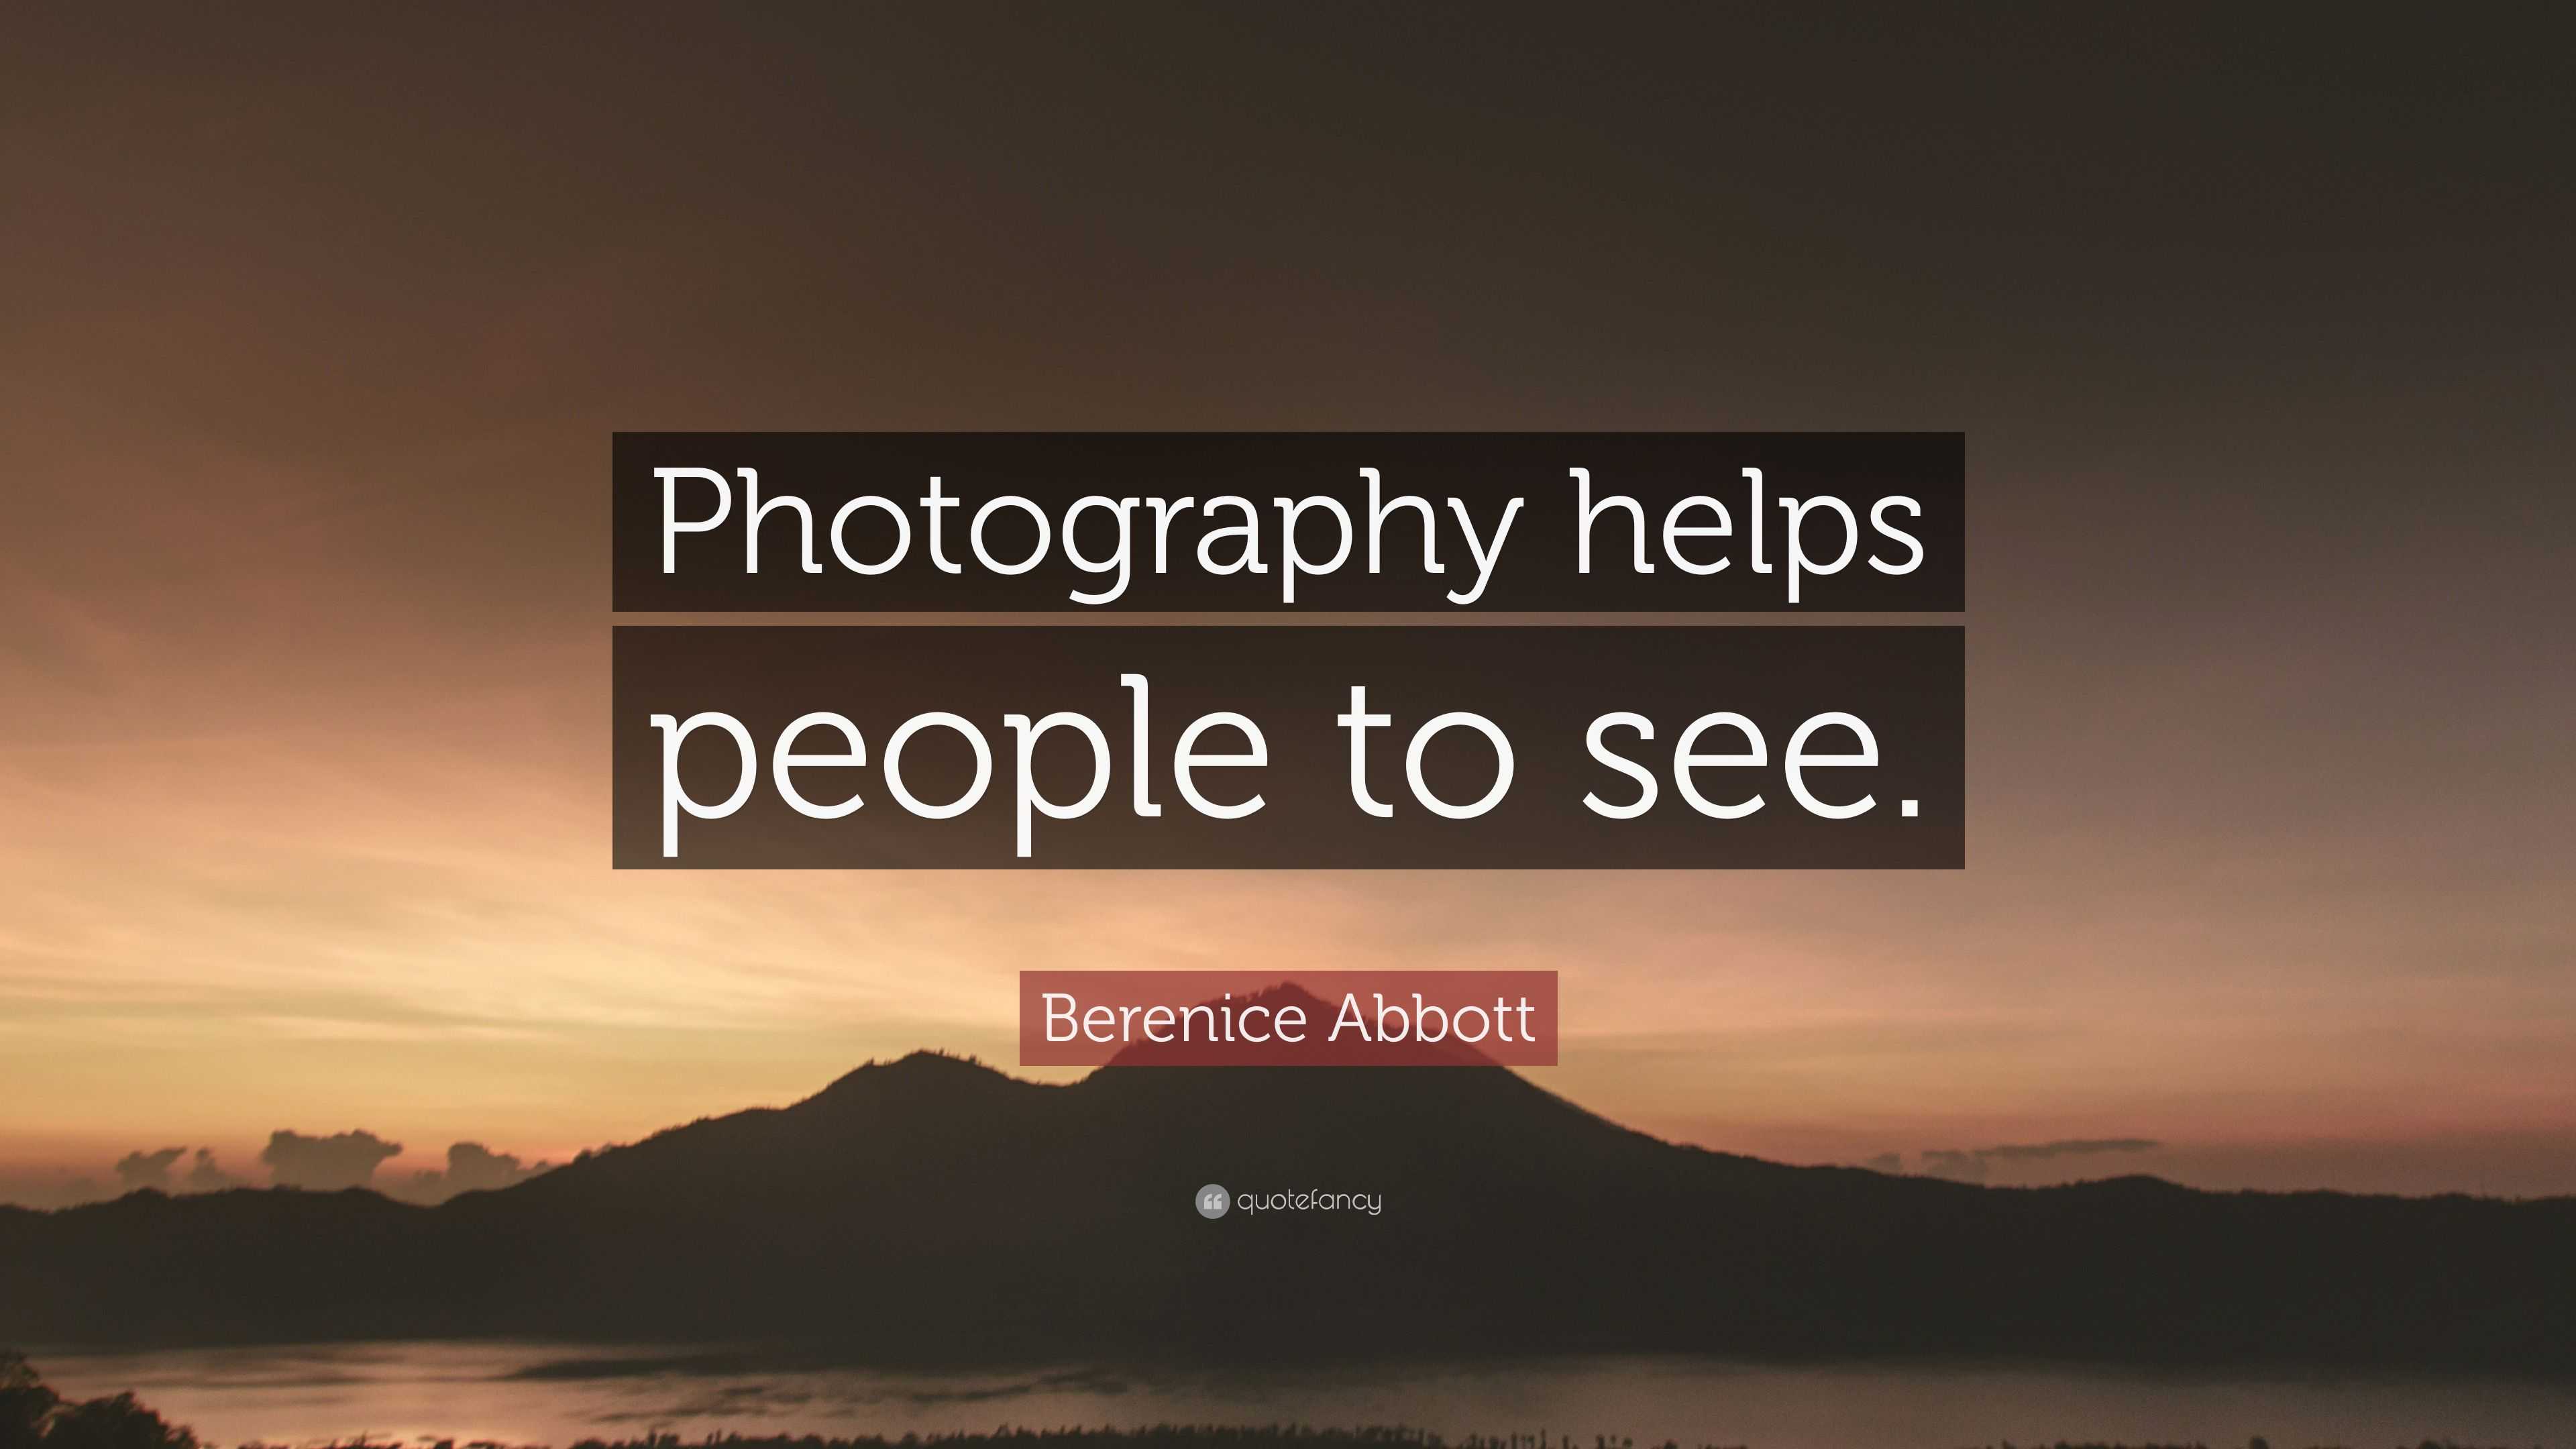 Berenice Abbott Quote: “Photography helps people to see.”